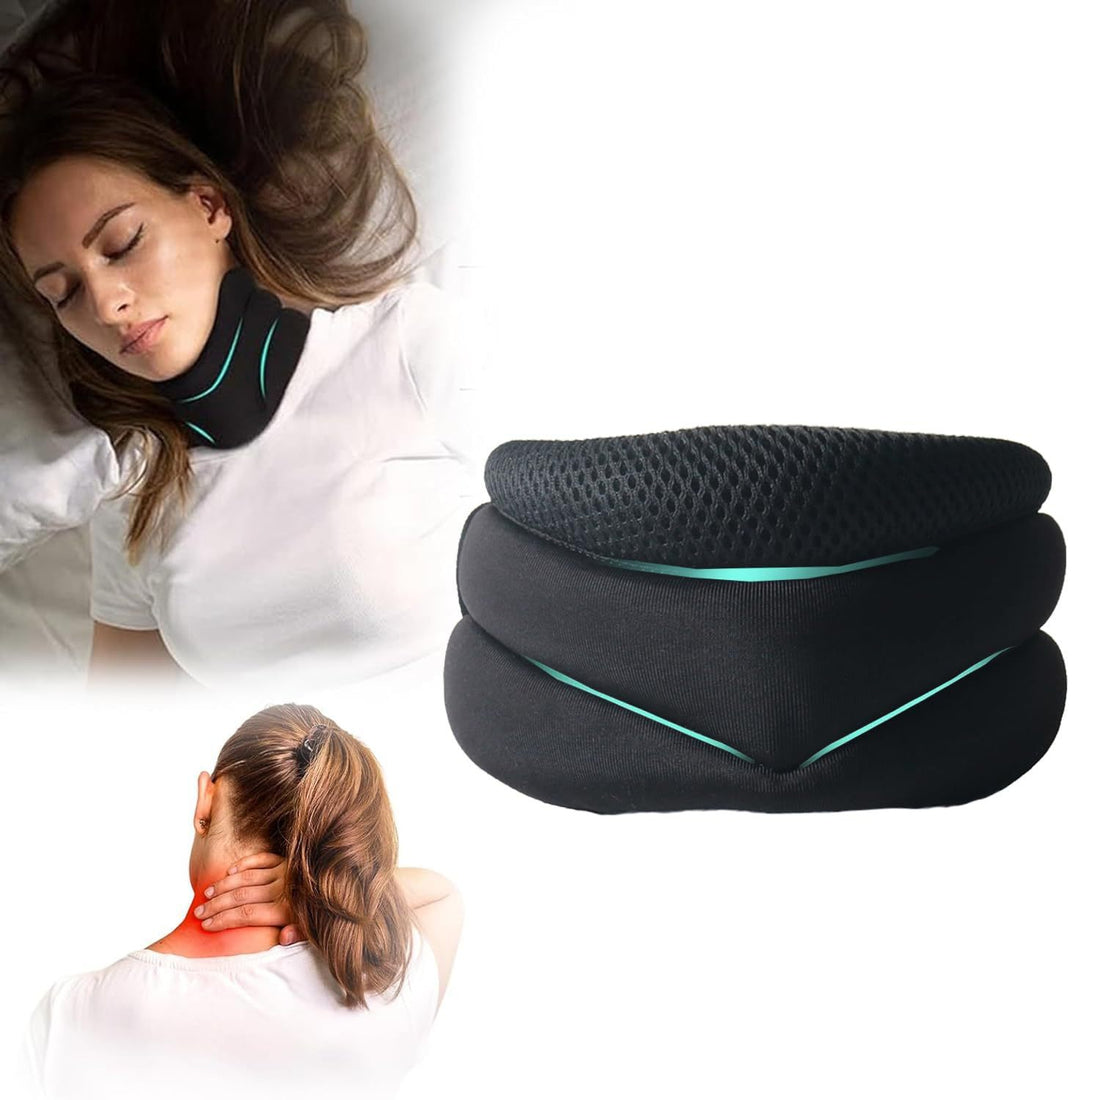 Upgraded Neck Brace Foam Cervical Collar For Pain Relief And Pressure In Spine Adjustable Neck Support - ZENICO